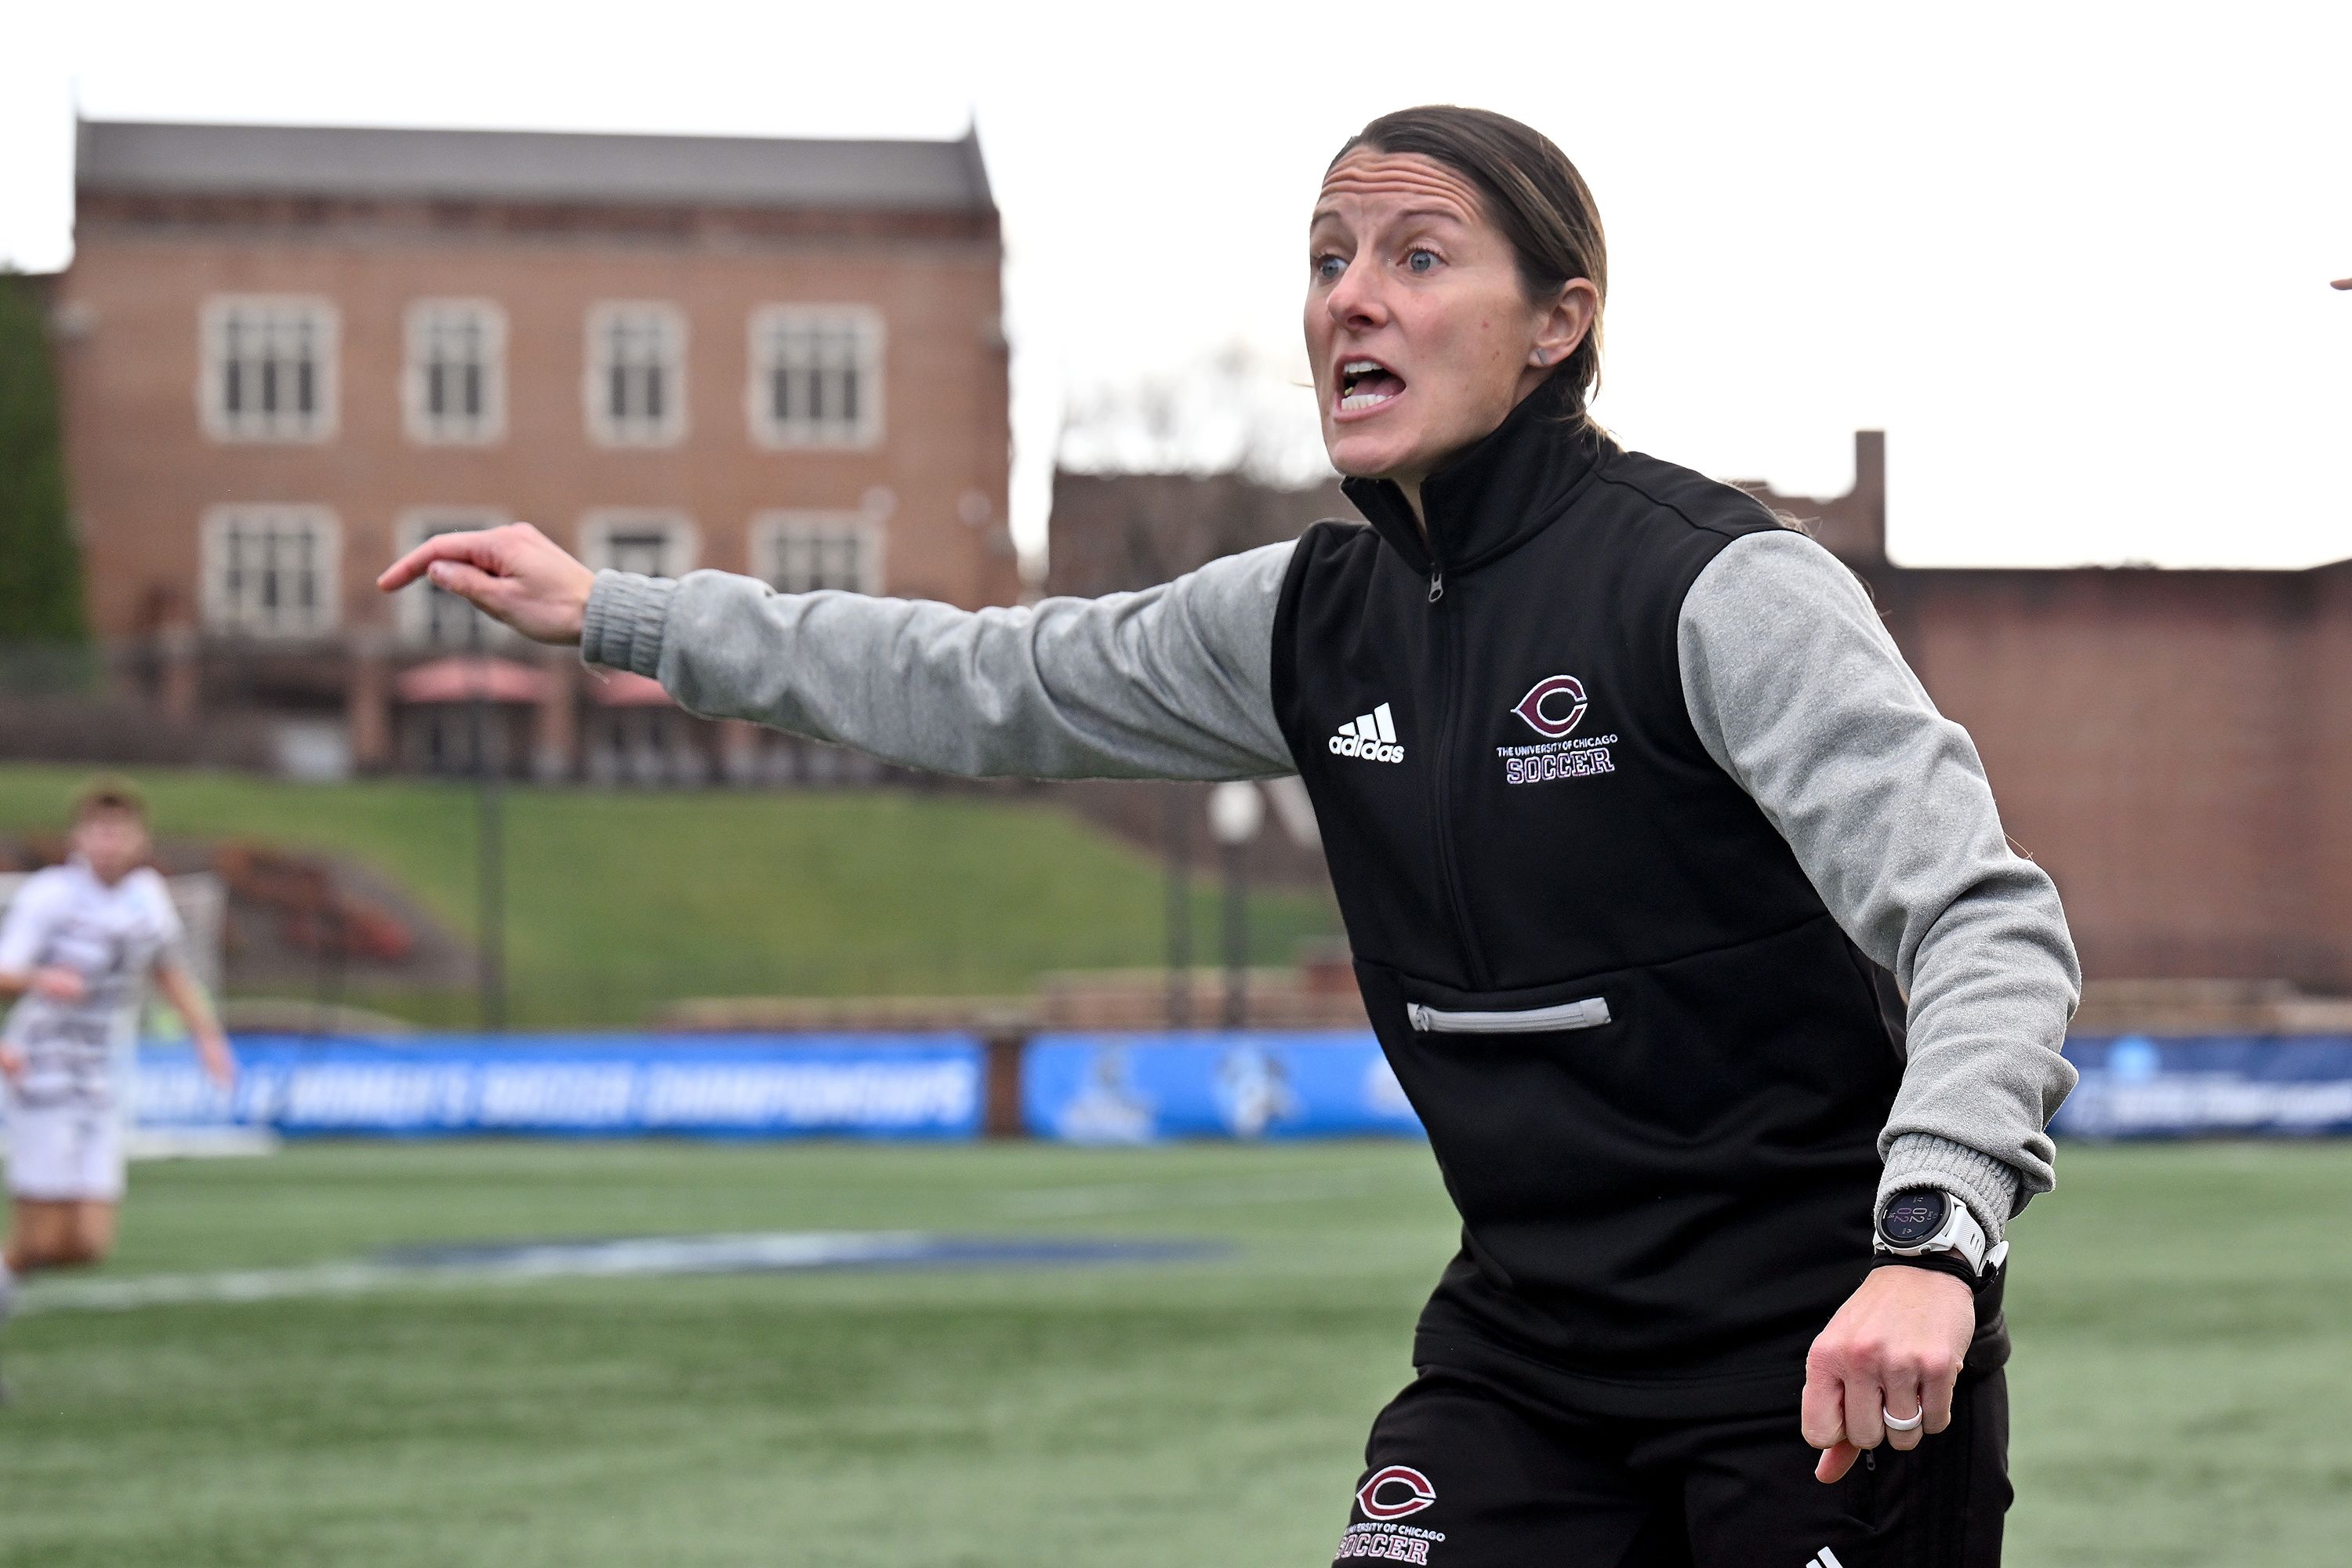 University of Chicago's Julianne Sitch becomes first woman coach to lead  NCAA men's soccer team to championship | CNN